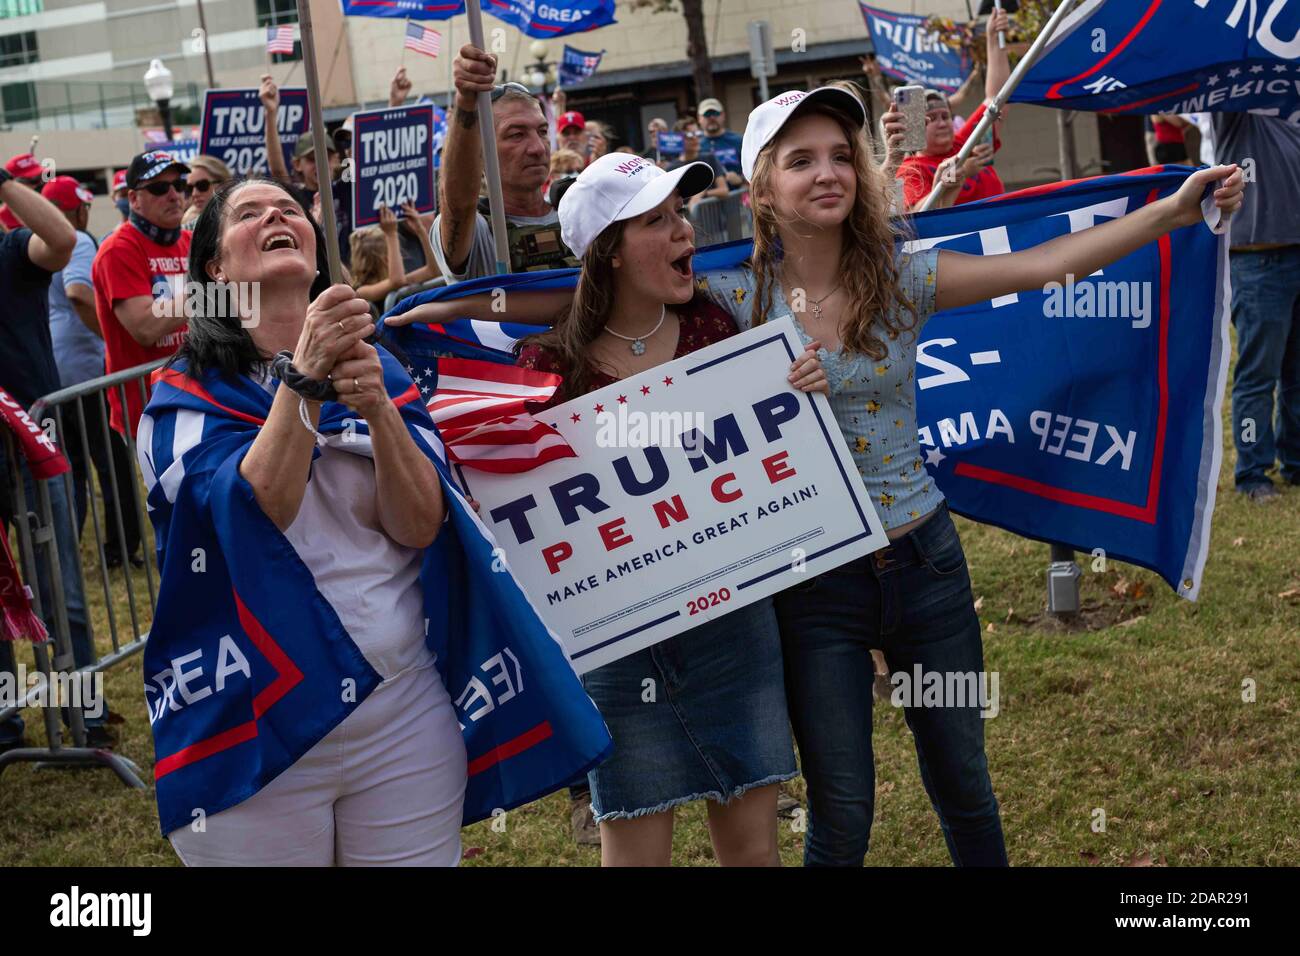 Fort Worth, Texas, USA. 14th Nov, 2020. 11/14/20 Fort Worth, Texas - Three women from Wichita Falls smile and chant while a massive crowd of Trump Supporters protests the 2020 Presidential Election in Fort Worth, Texas. Credit: Chris Rusanowsky/ZUMA Wire/Alamy Live News Stock Photo